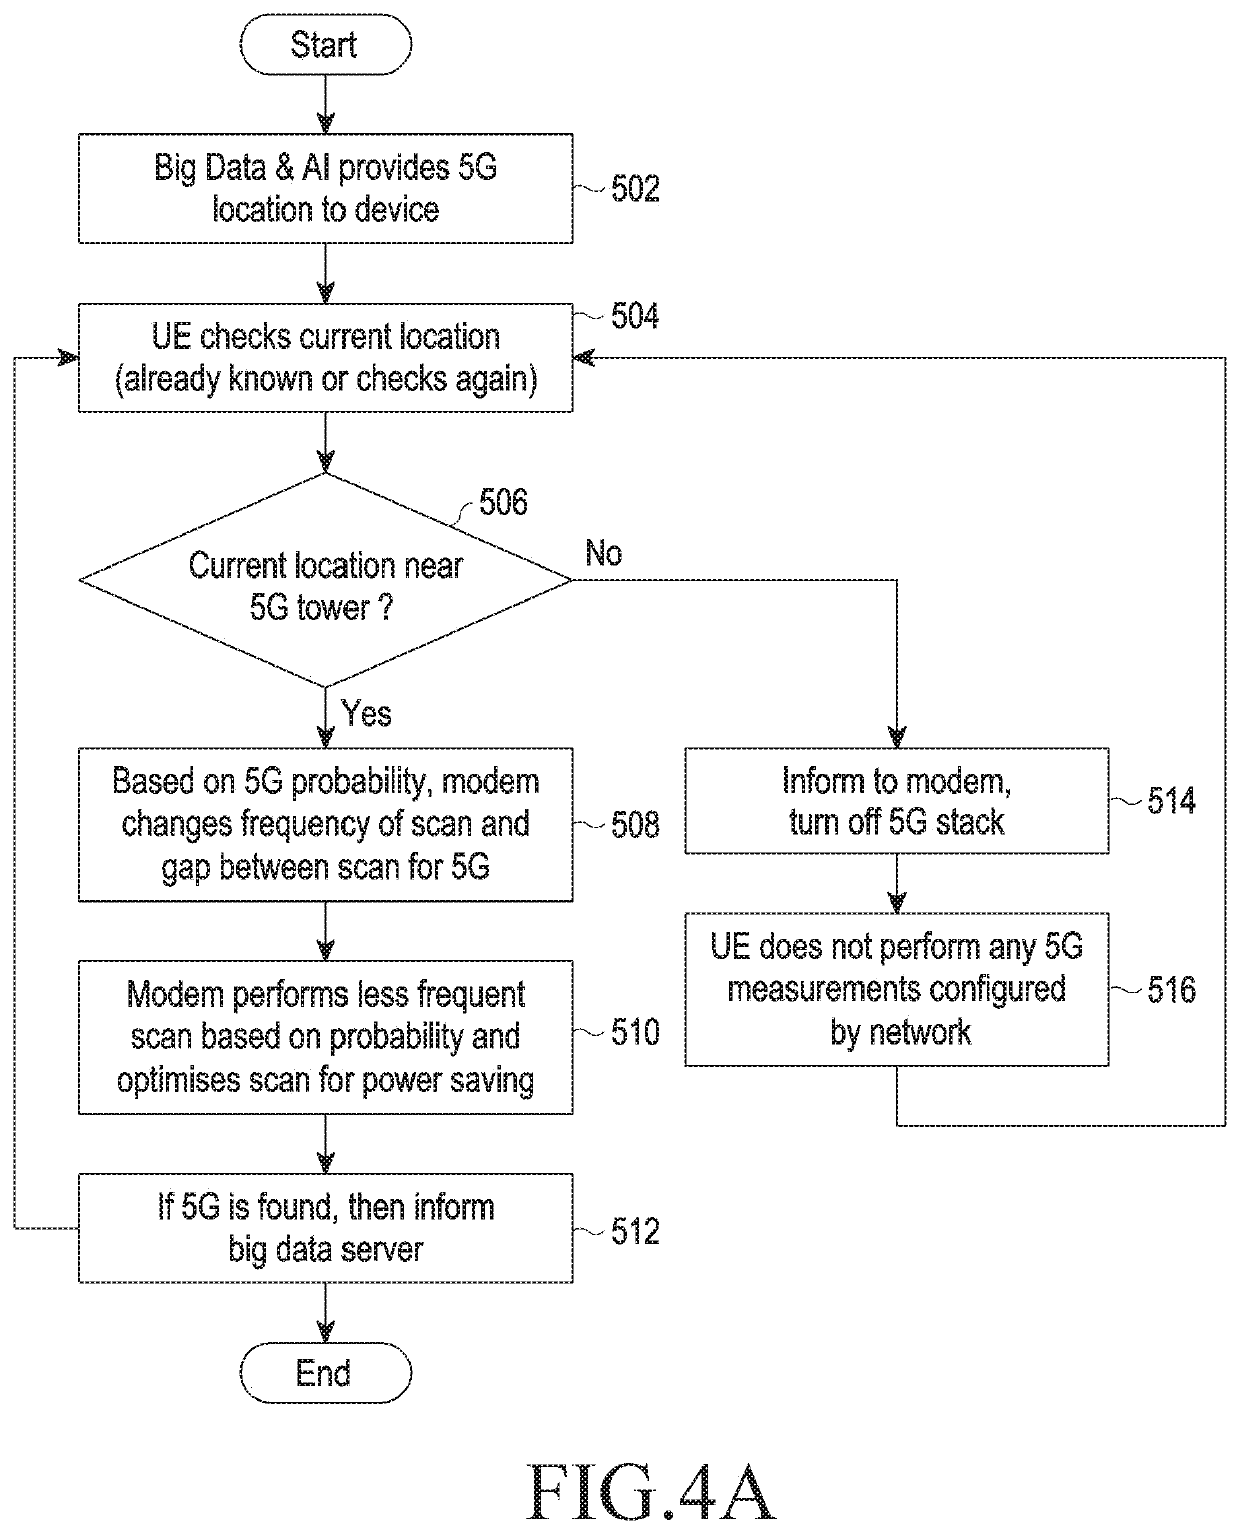 Method and system for mobility measurements in new radio (NR) based mobile communication network